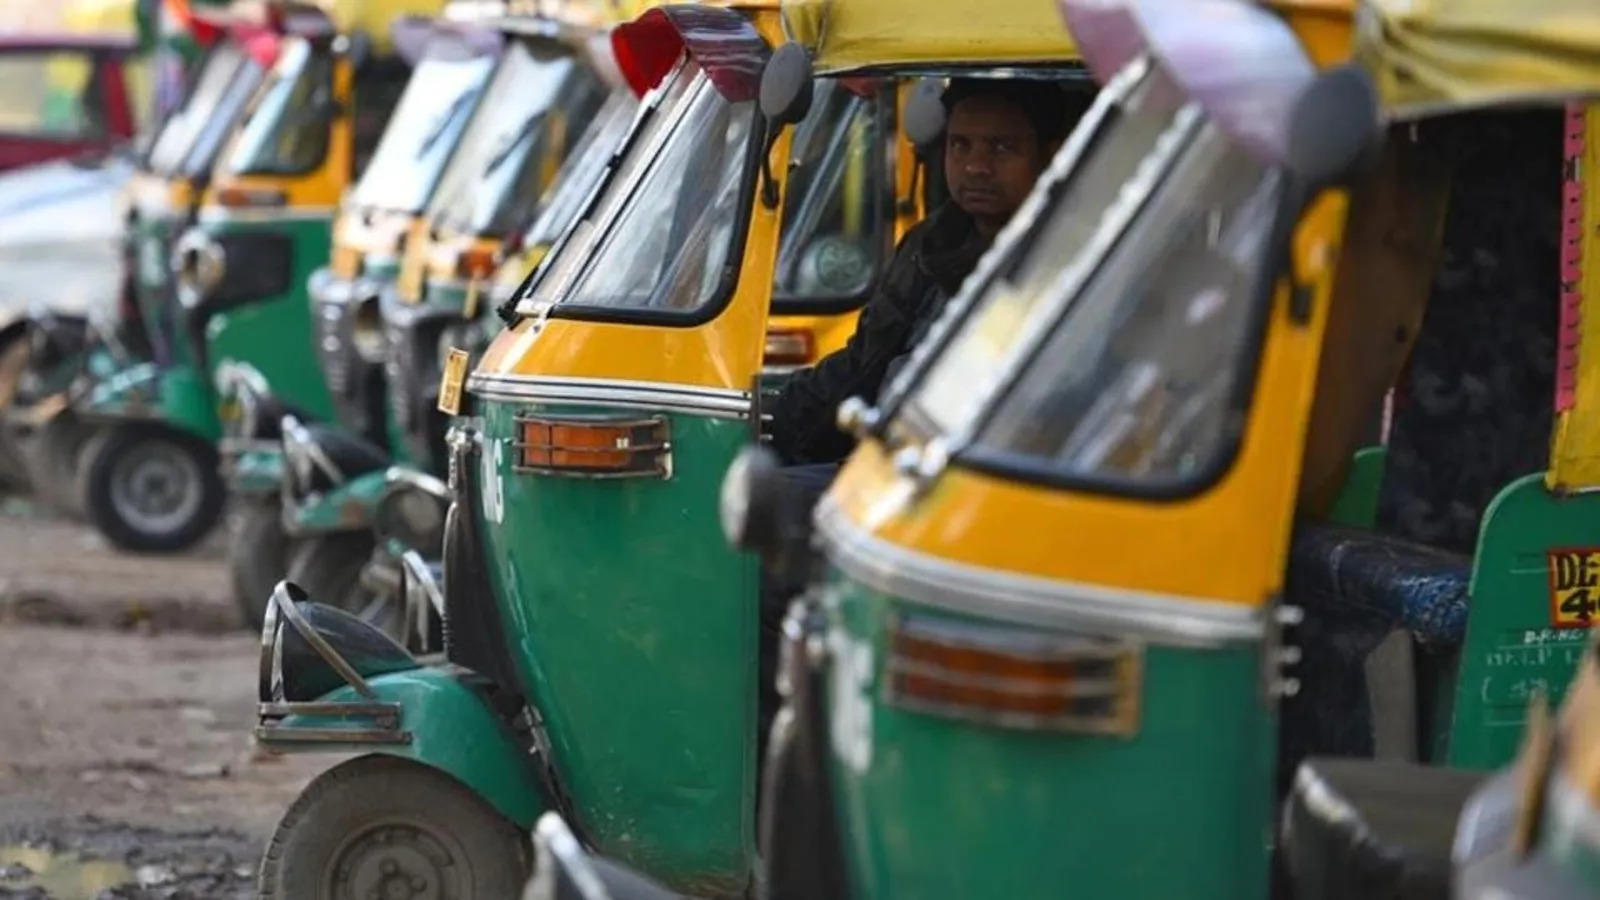 'Peak Bengaluru': An Auto Driver Accepts Trip Requests From Two Apps at Once